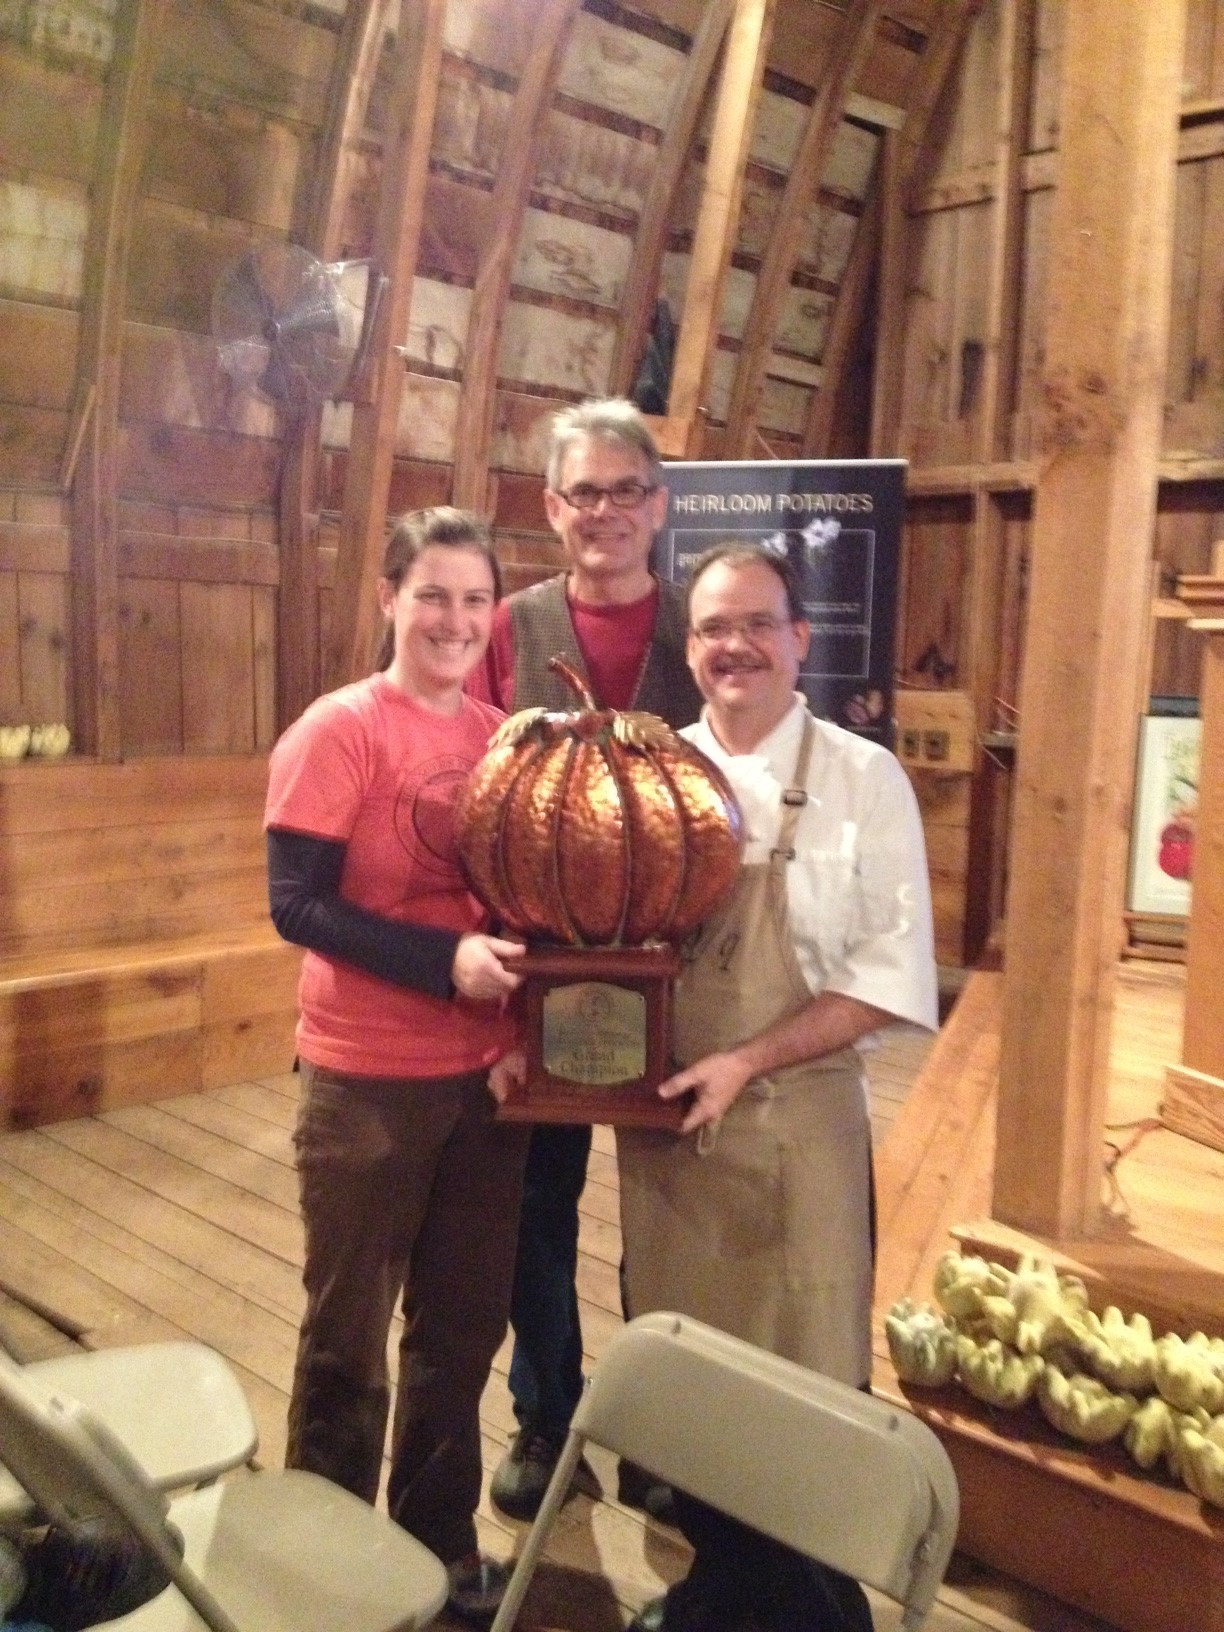 Soup cook-off winner Chef Stephen Larson from Quarter/QUARTER, along with SSE's Shannon Carmody and John Torgrimson